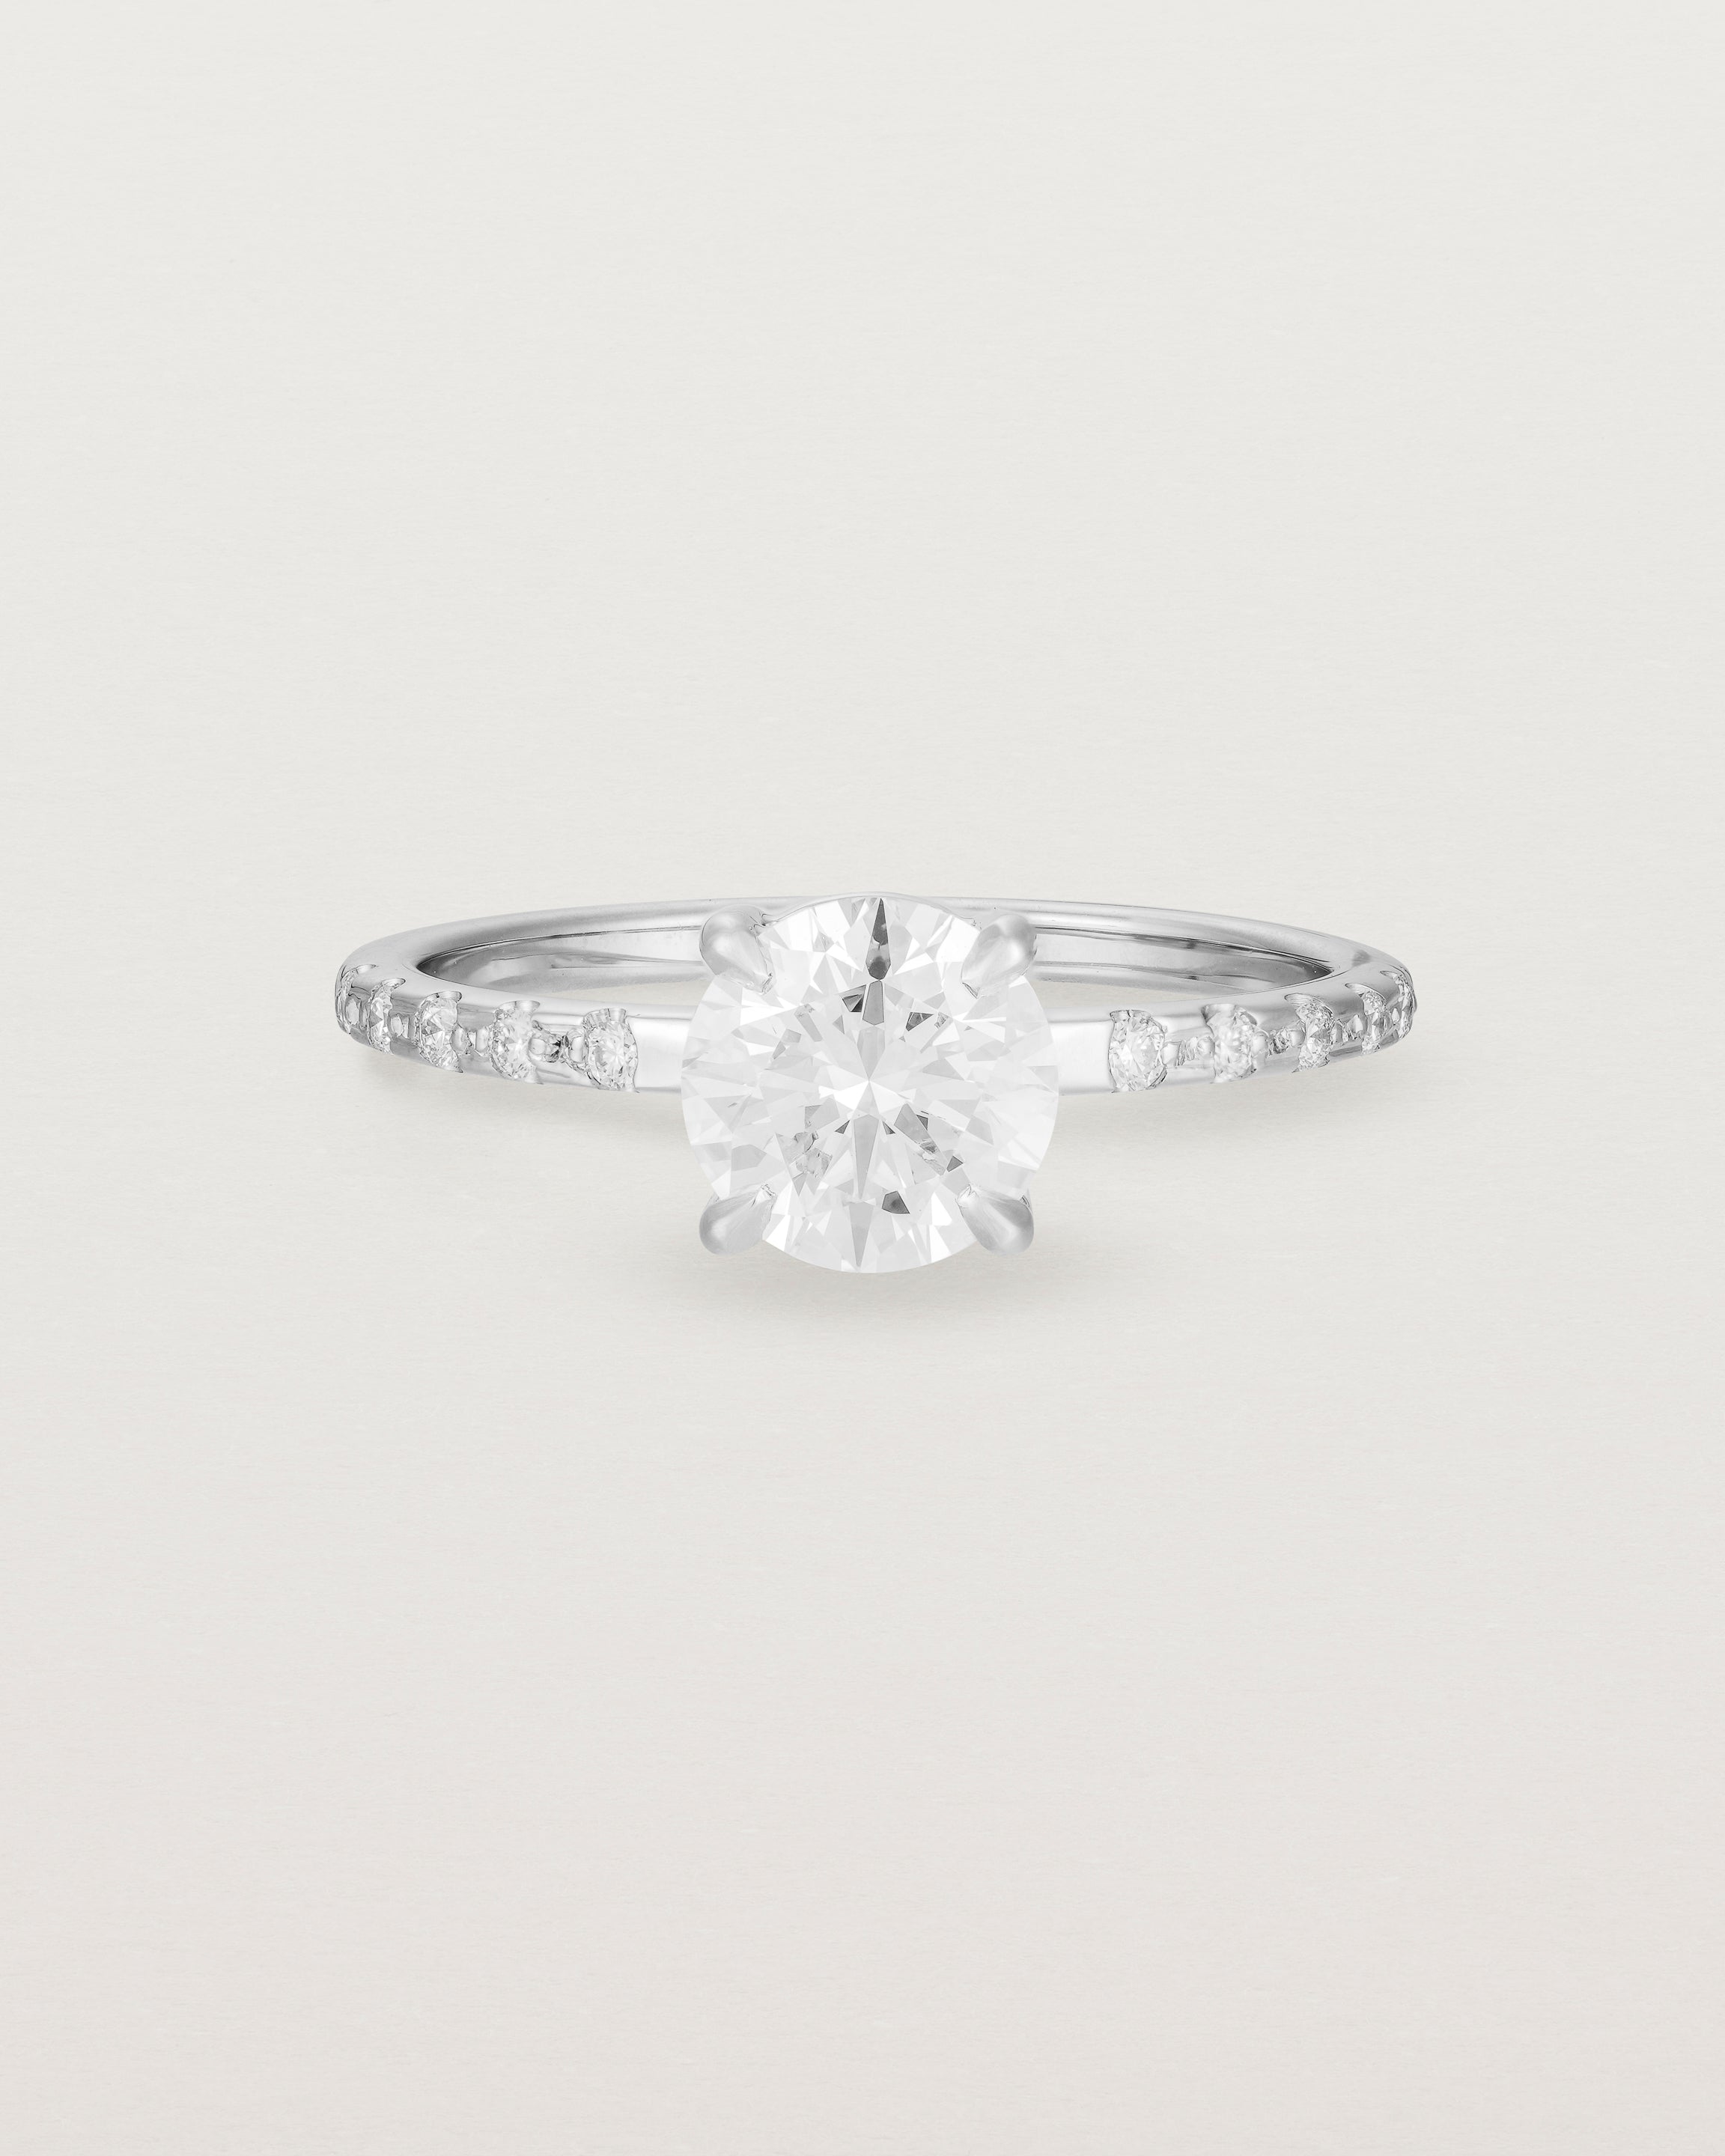 Front view of the Petite Una Round Solitaire | Laboratory Grown Diamond | White Gold with Cascade Shoulders.